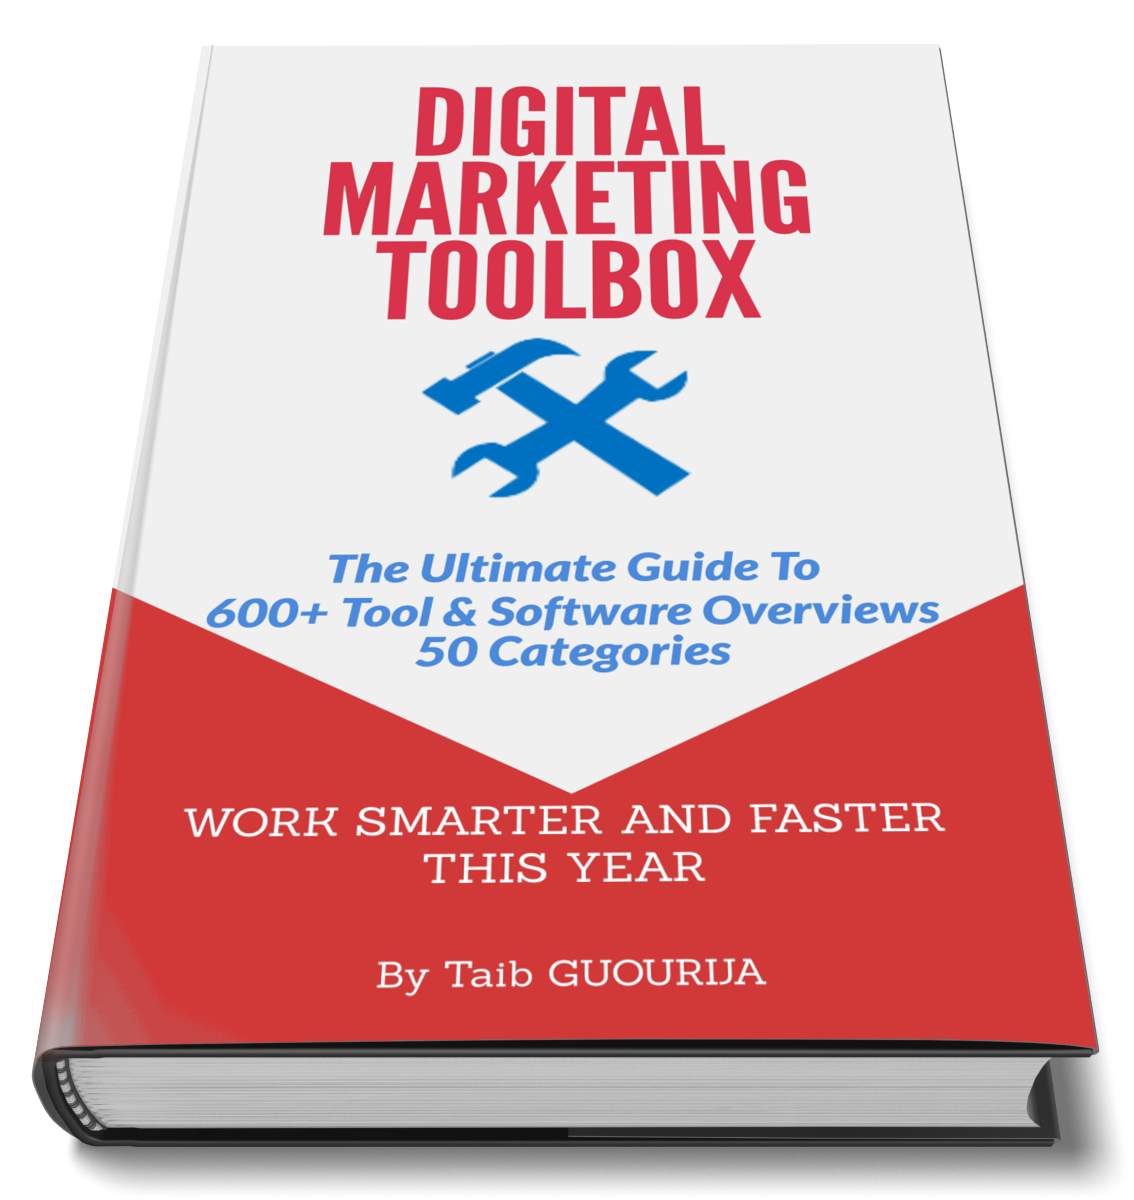 The Ultimate Guide To
600+ Tool & Software Overviews
50 Categories

 

/ WORK SMARTER AND FASTER
THIS YEAR

| By Taib GUOURDA